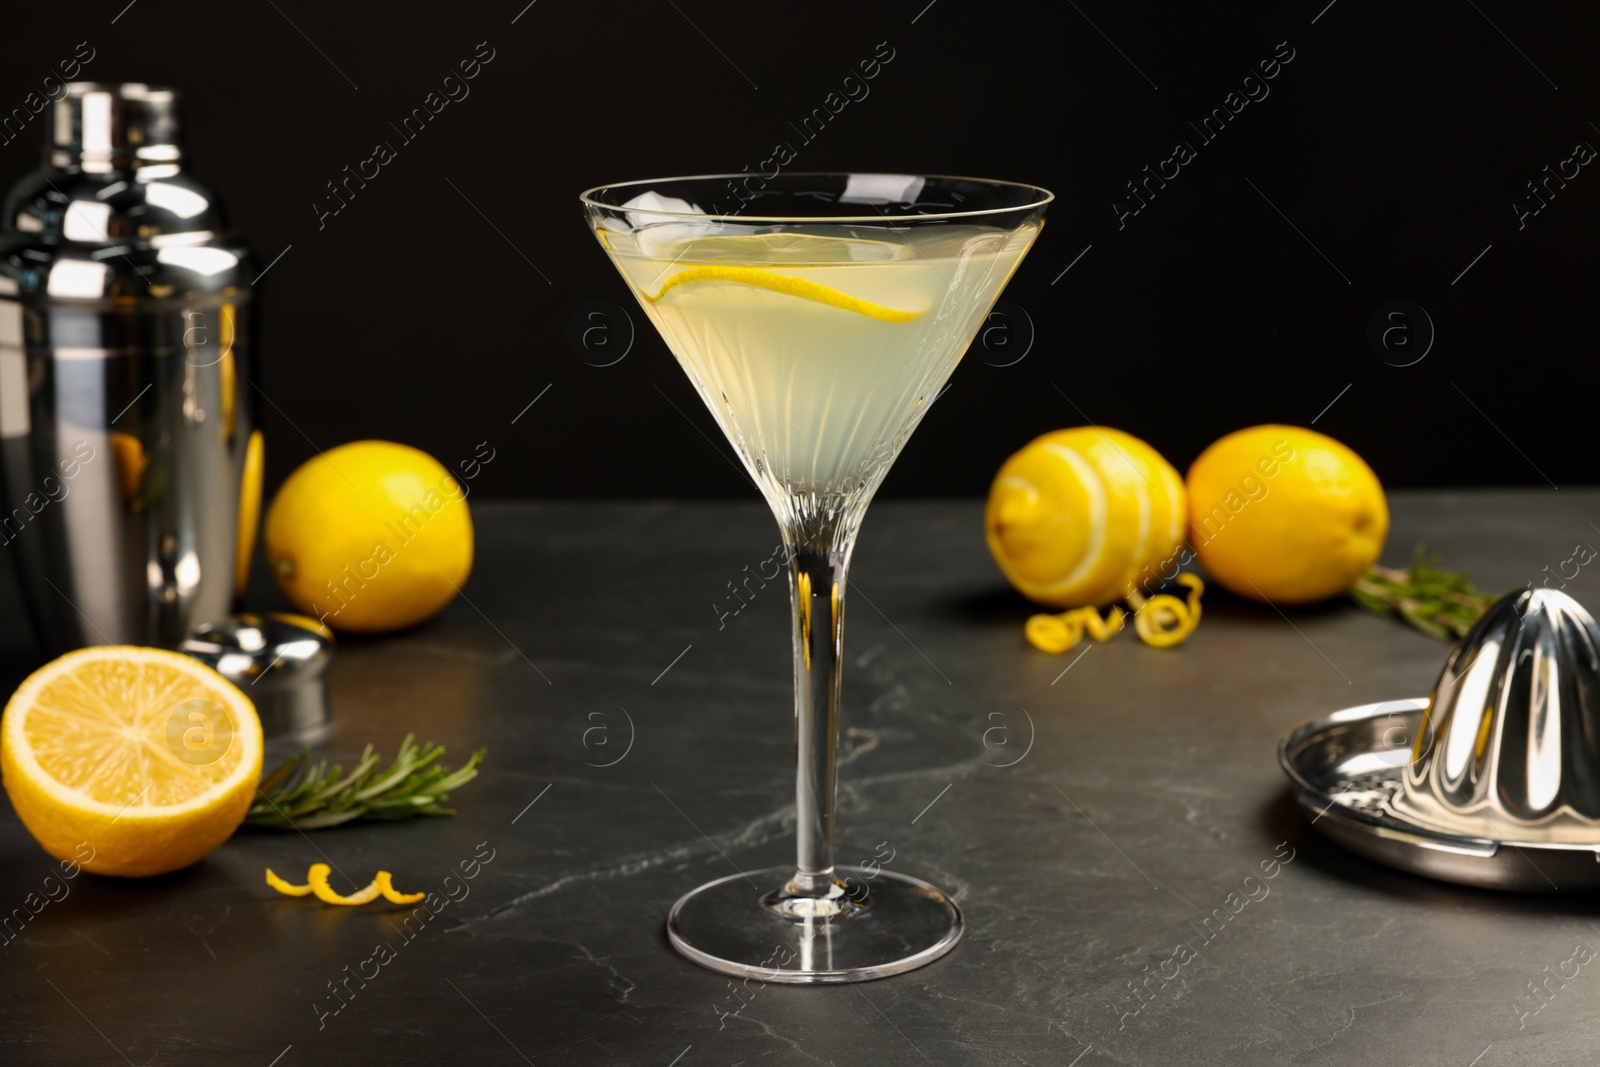 Photo of Martini glass of refreshing cocktail with lemon slice, fresh fruits, rosemary, shaker and hand citrus squeezer on black table